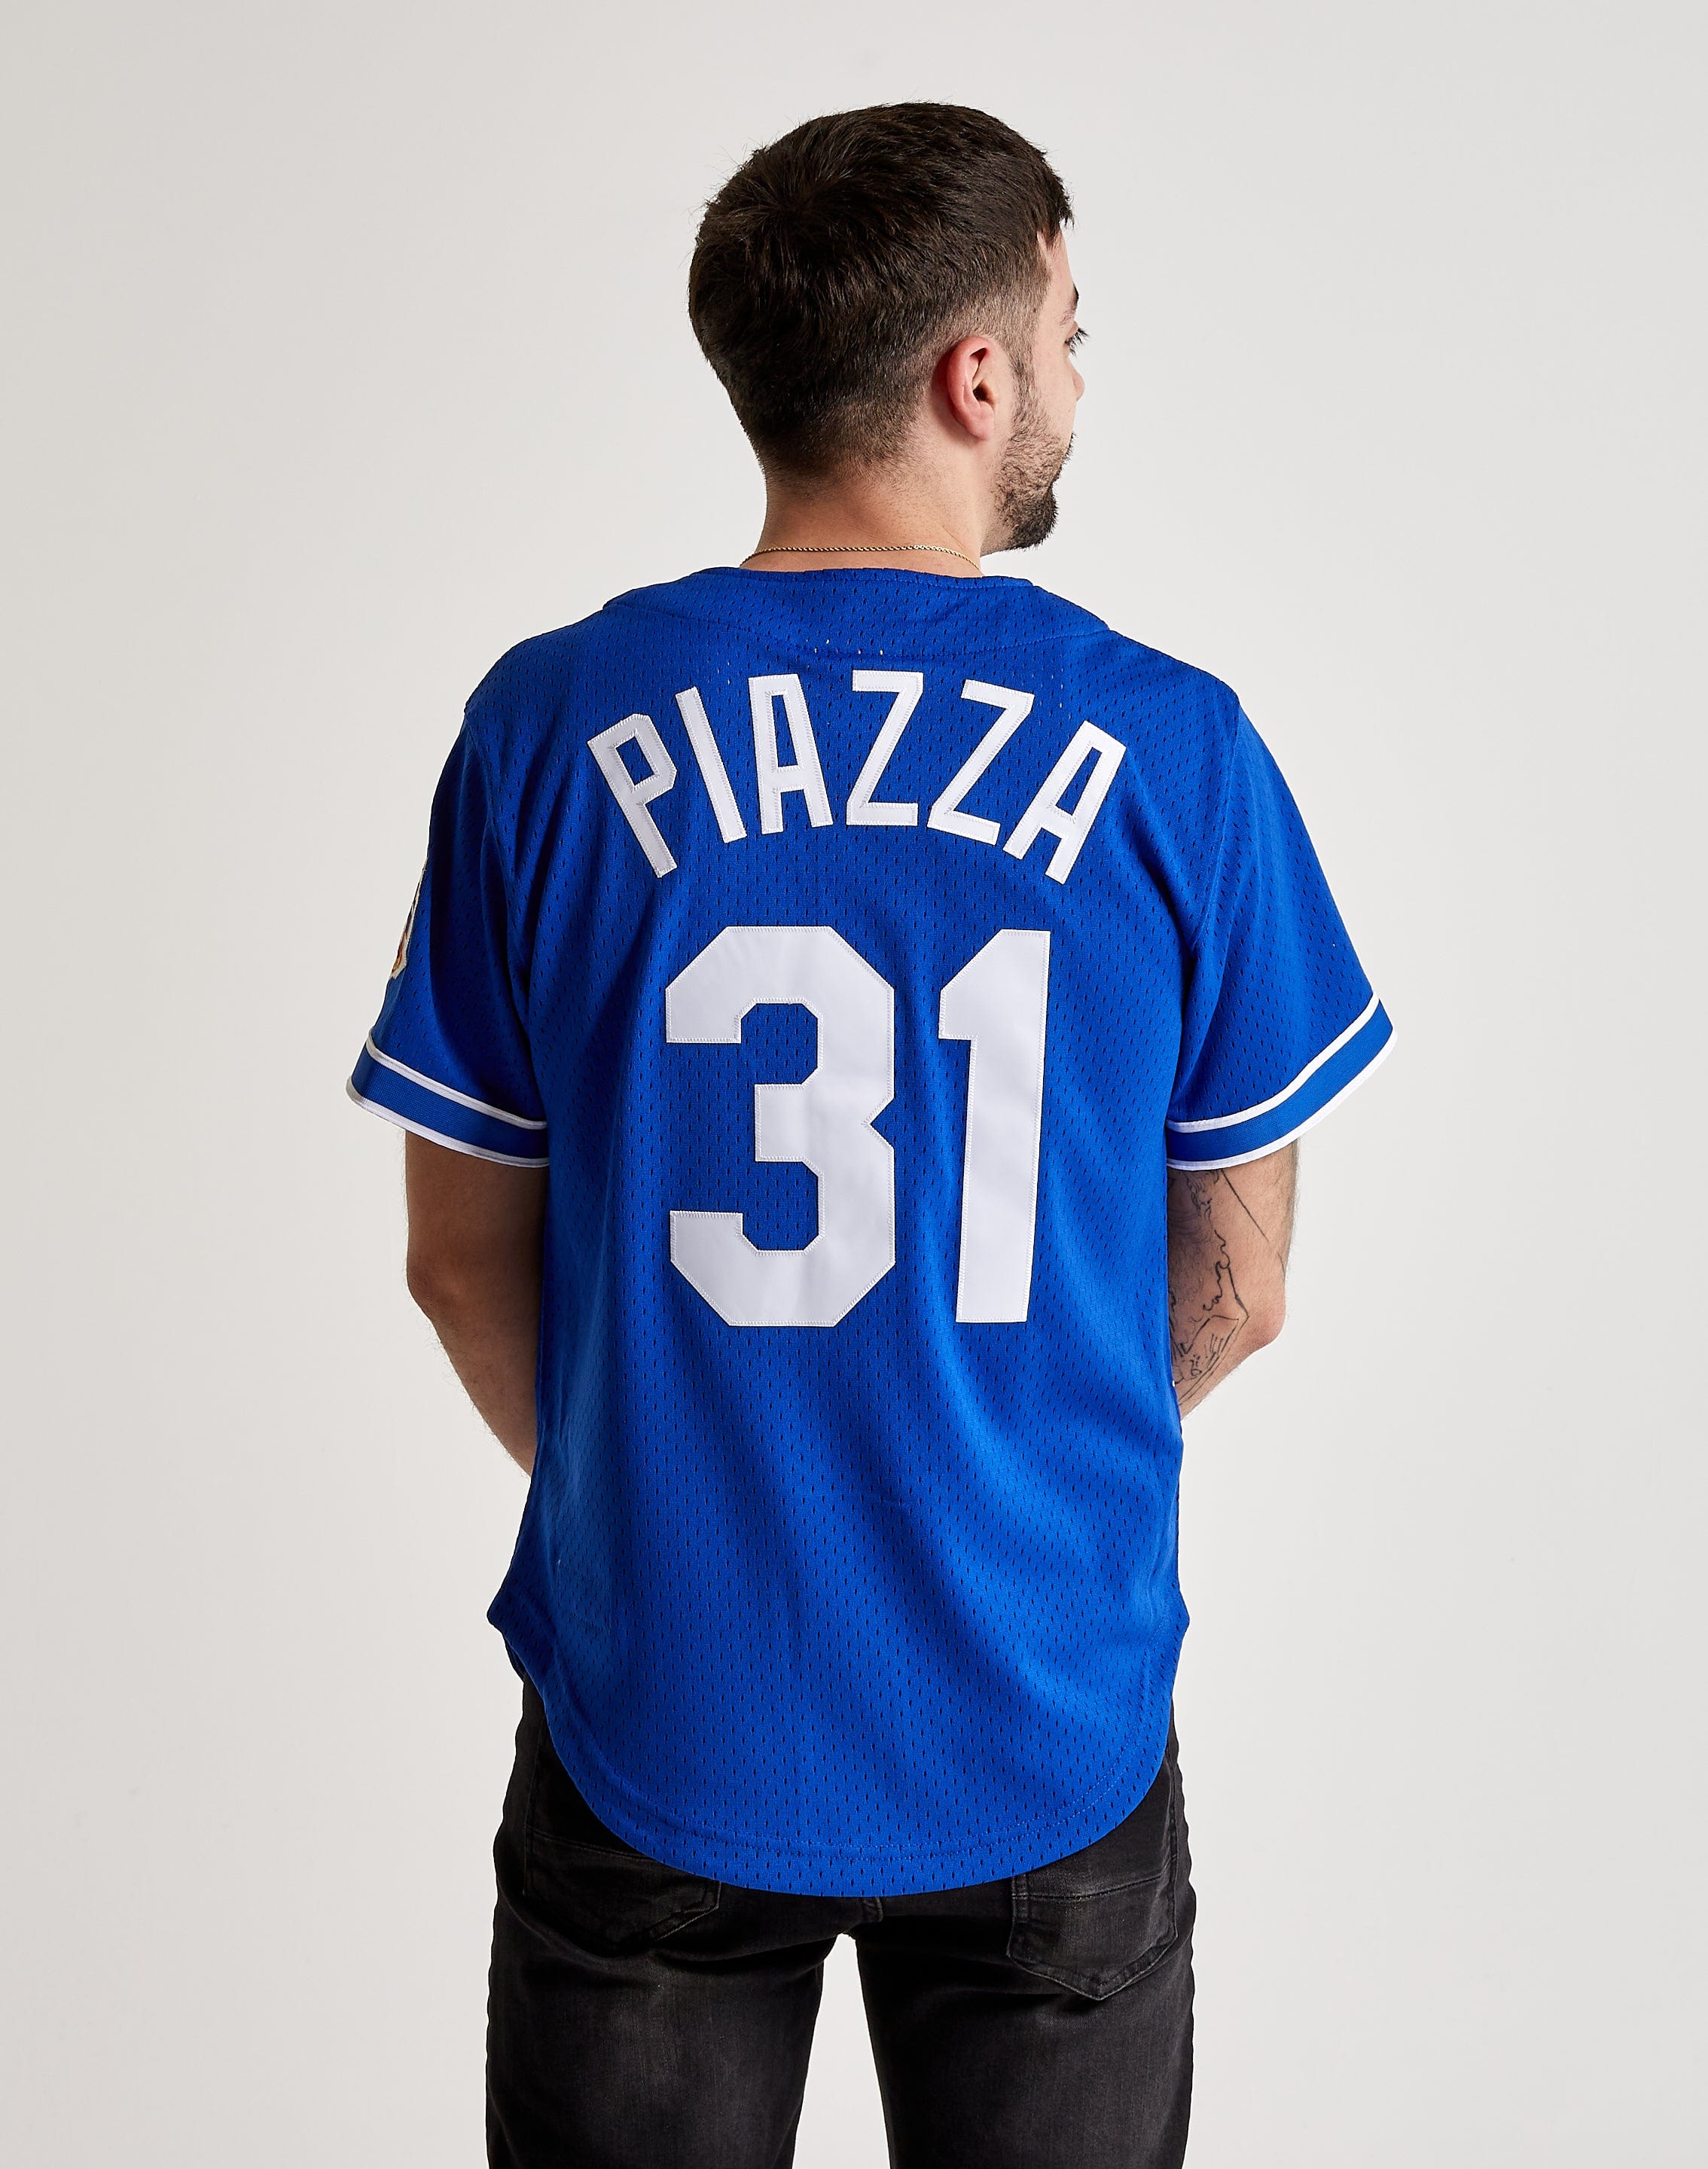 Mitchell & Ness Mens Los Angeles Dodgers Mike Piazza Authentic Jersey, L